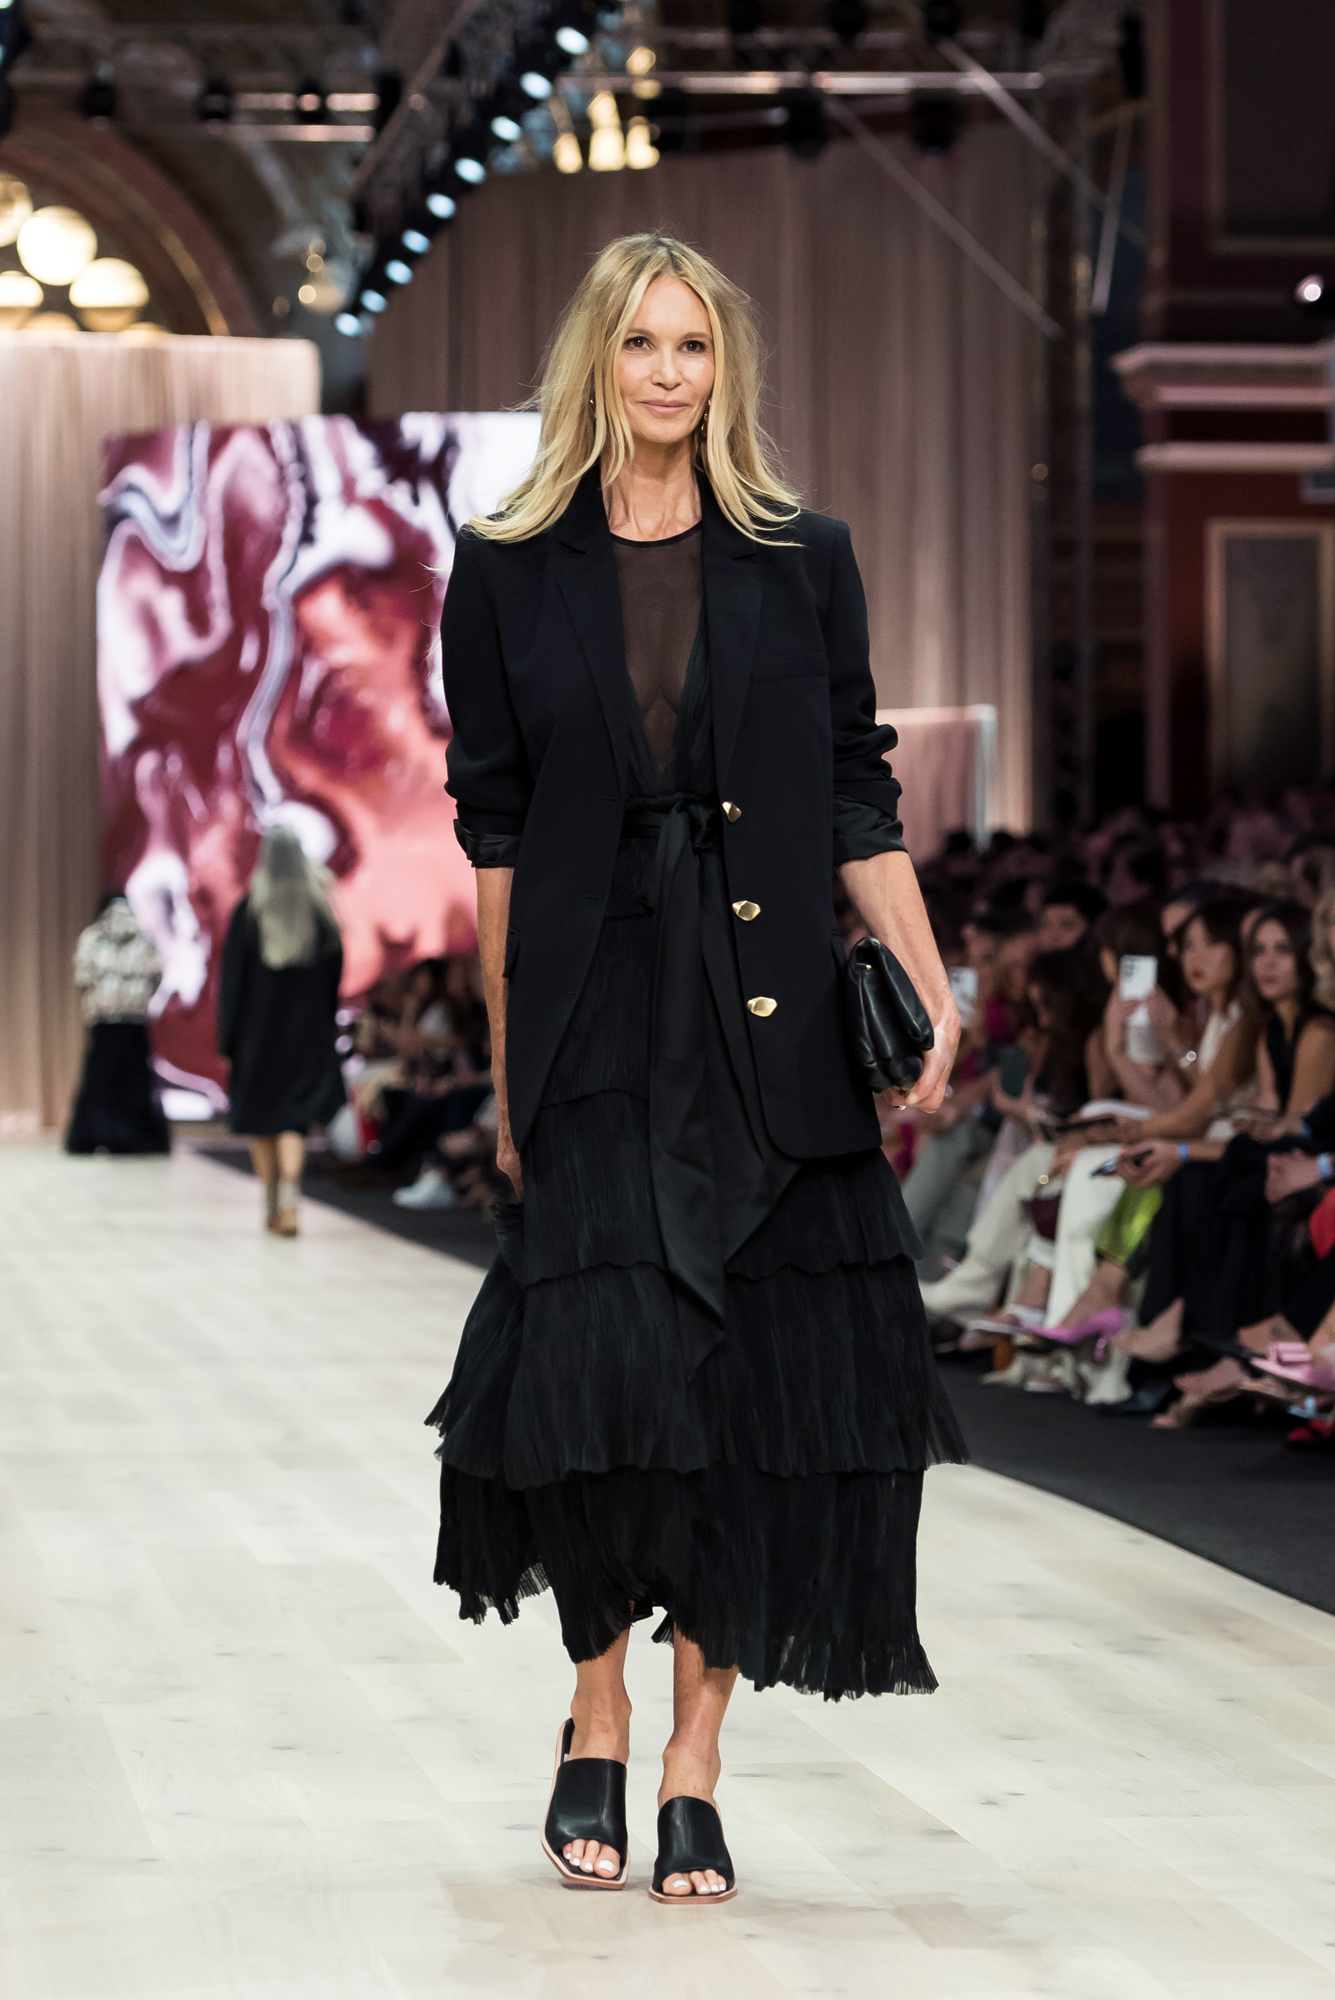 Elle Macpherson Returns to the Runway After 14 Years